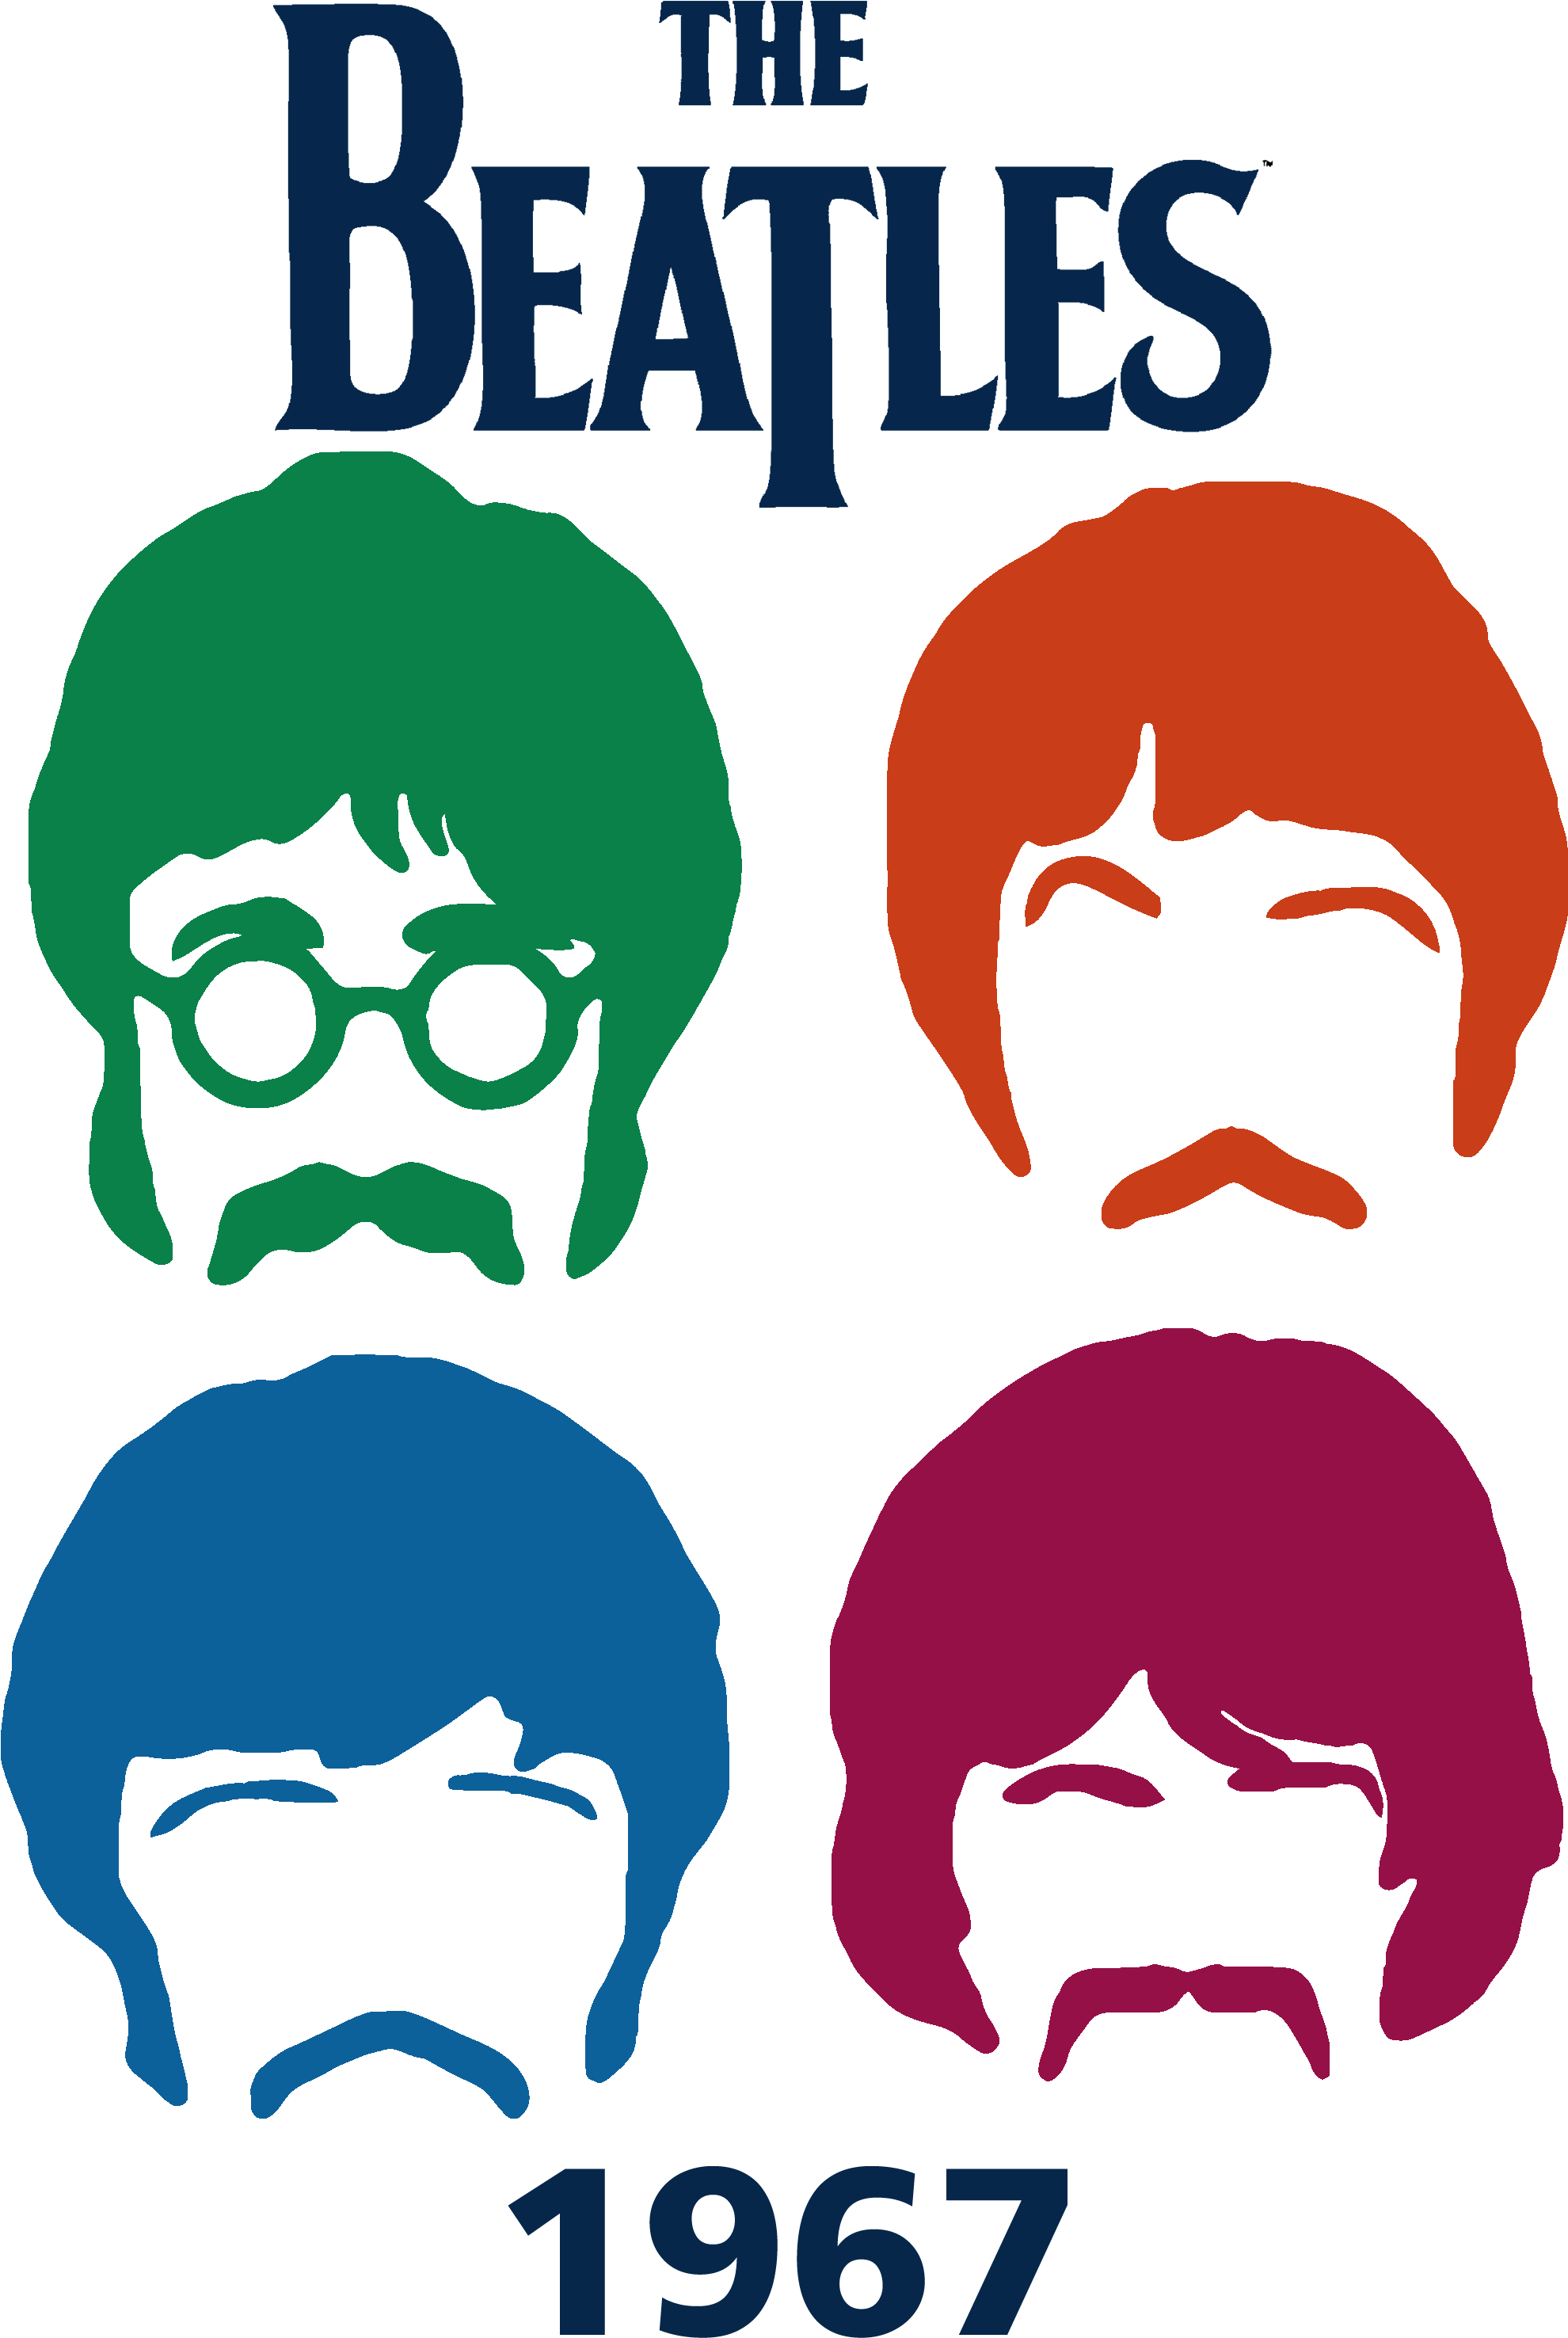 The Beatles - The Beatles (2160x3240)